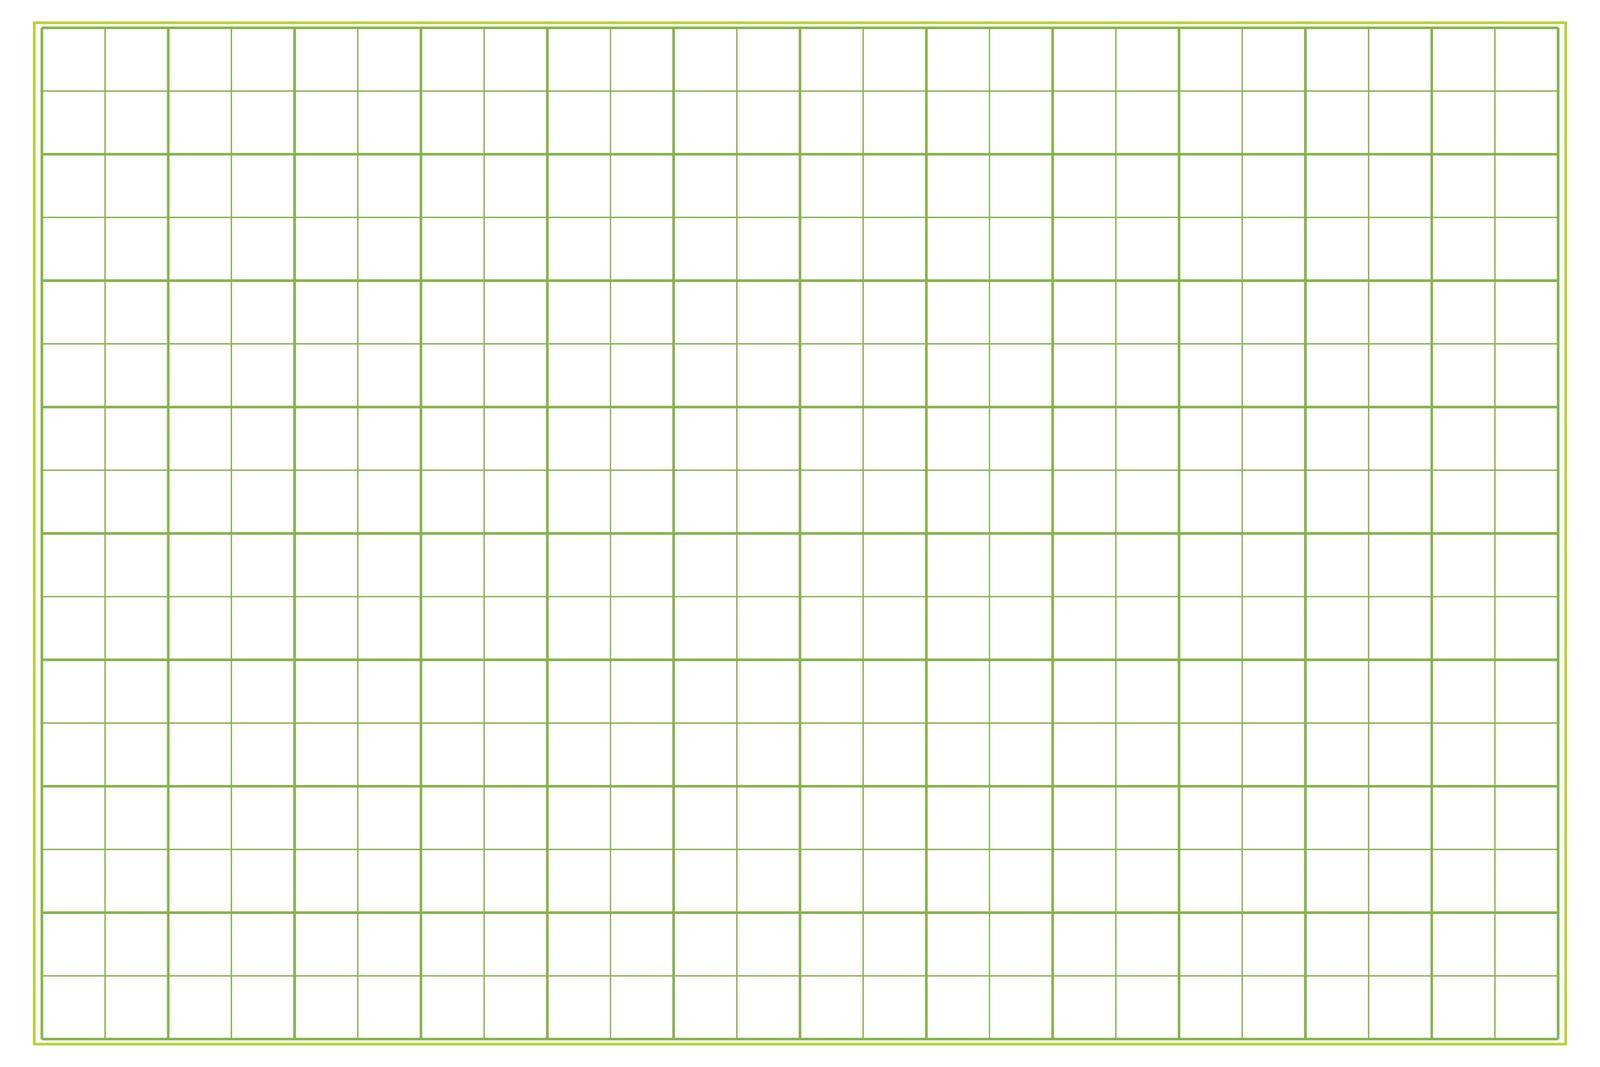 Millimeter graph paper grid. Abstract squared background. Geometric pattern for school, technical engineering line scale measurement. Lined blank for education isolated on transparent background.